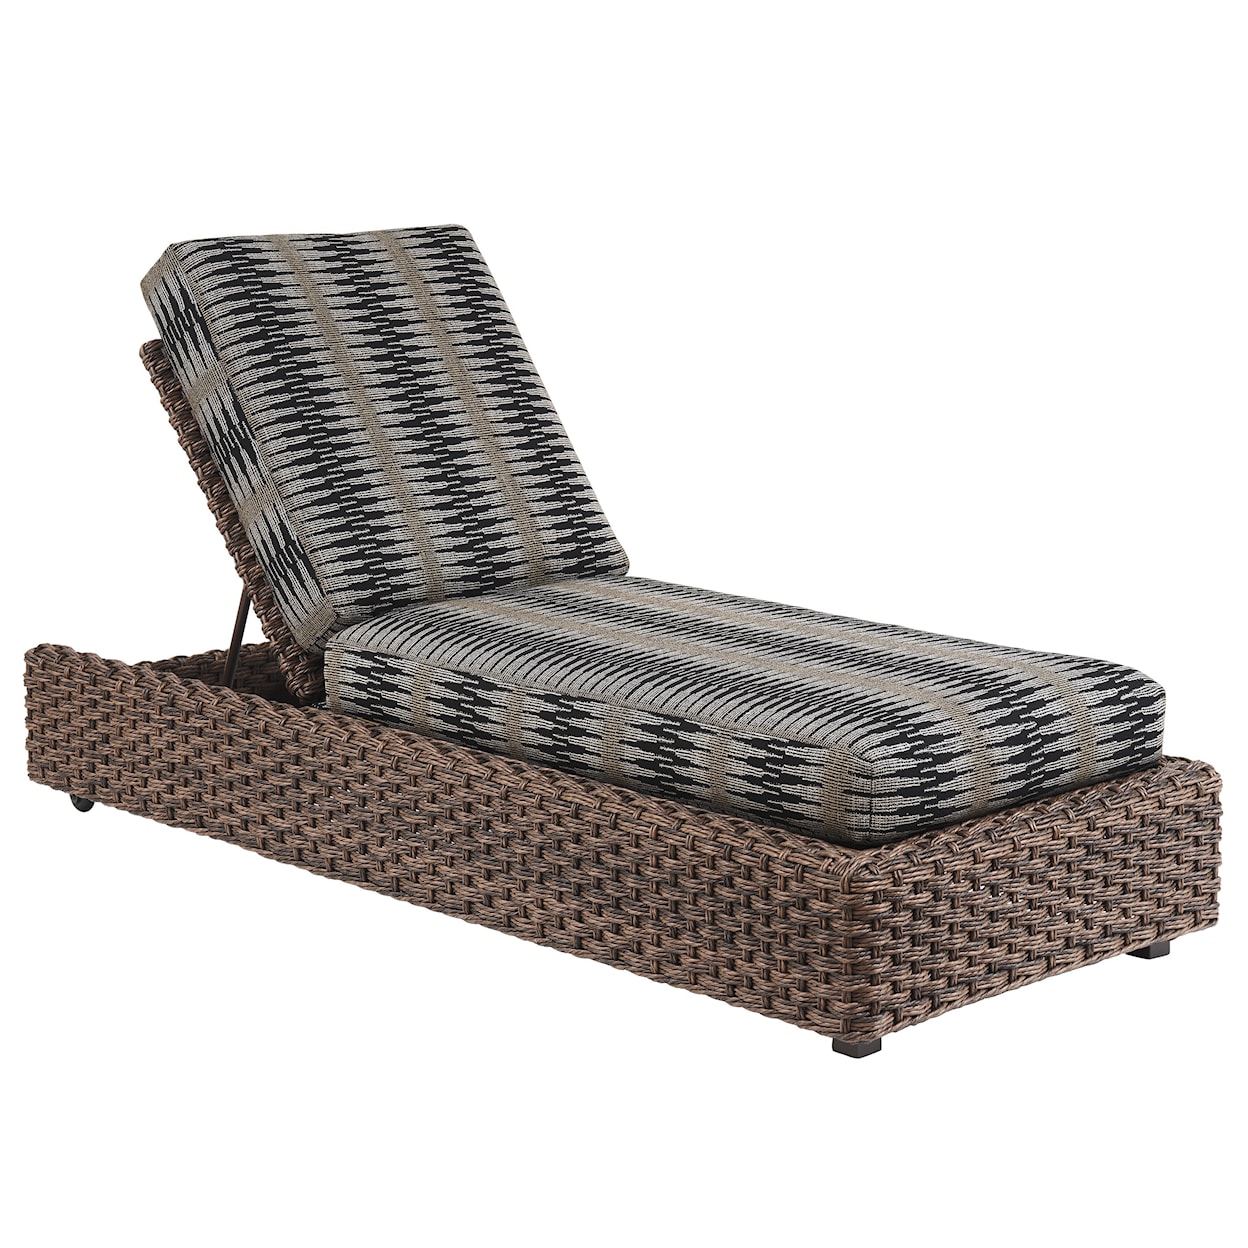 Tommy Bahama Outdoor Living Kilimanjaro Outdoor Chaise Lounge